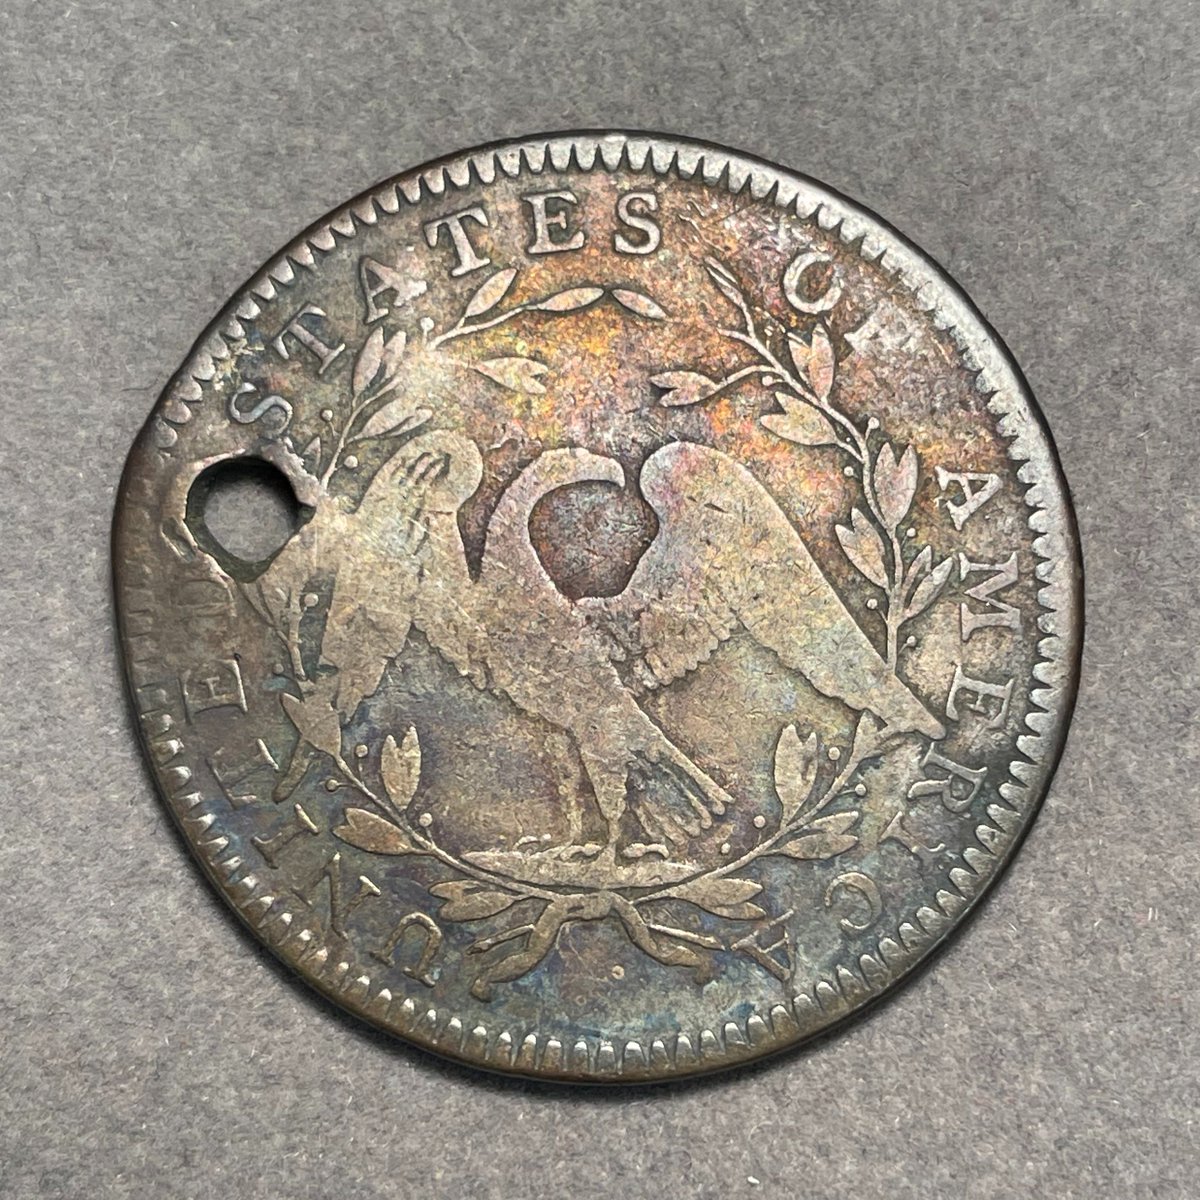 1794 dated half dollar. This is the oldest US coin in the collection of the @hunterian. Its engraver, Robert Scot, was born in Jacobite occupied Edinburgh on 2 October 1745. Scot designed many of the USA's earliest coins. #Numismatics #SaturdayNightCoinShow #ScottishHistory